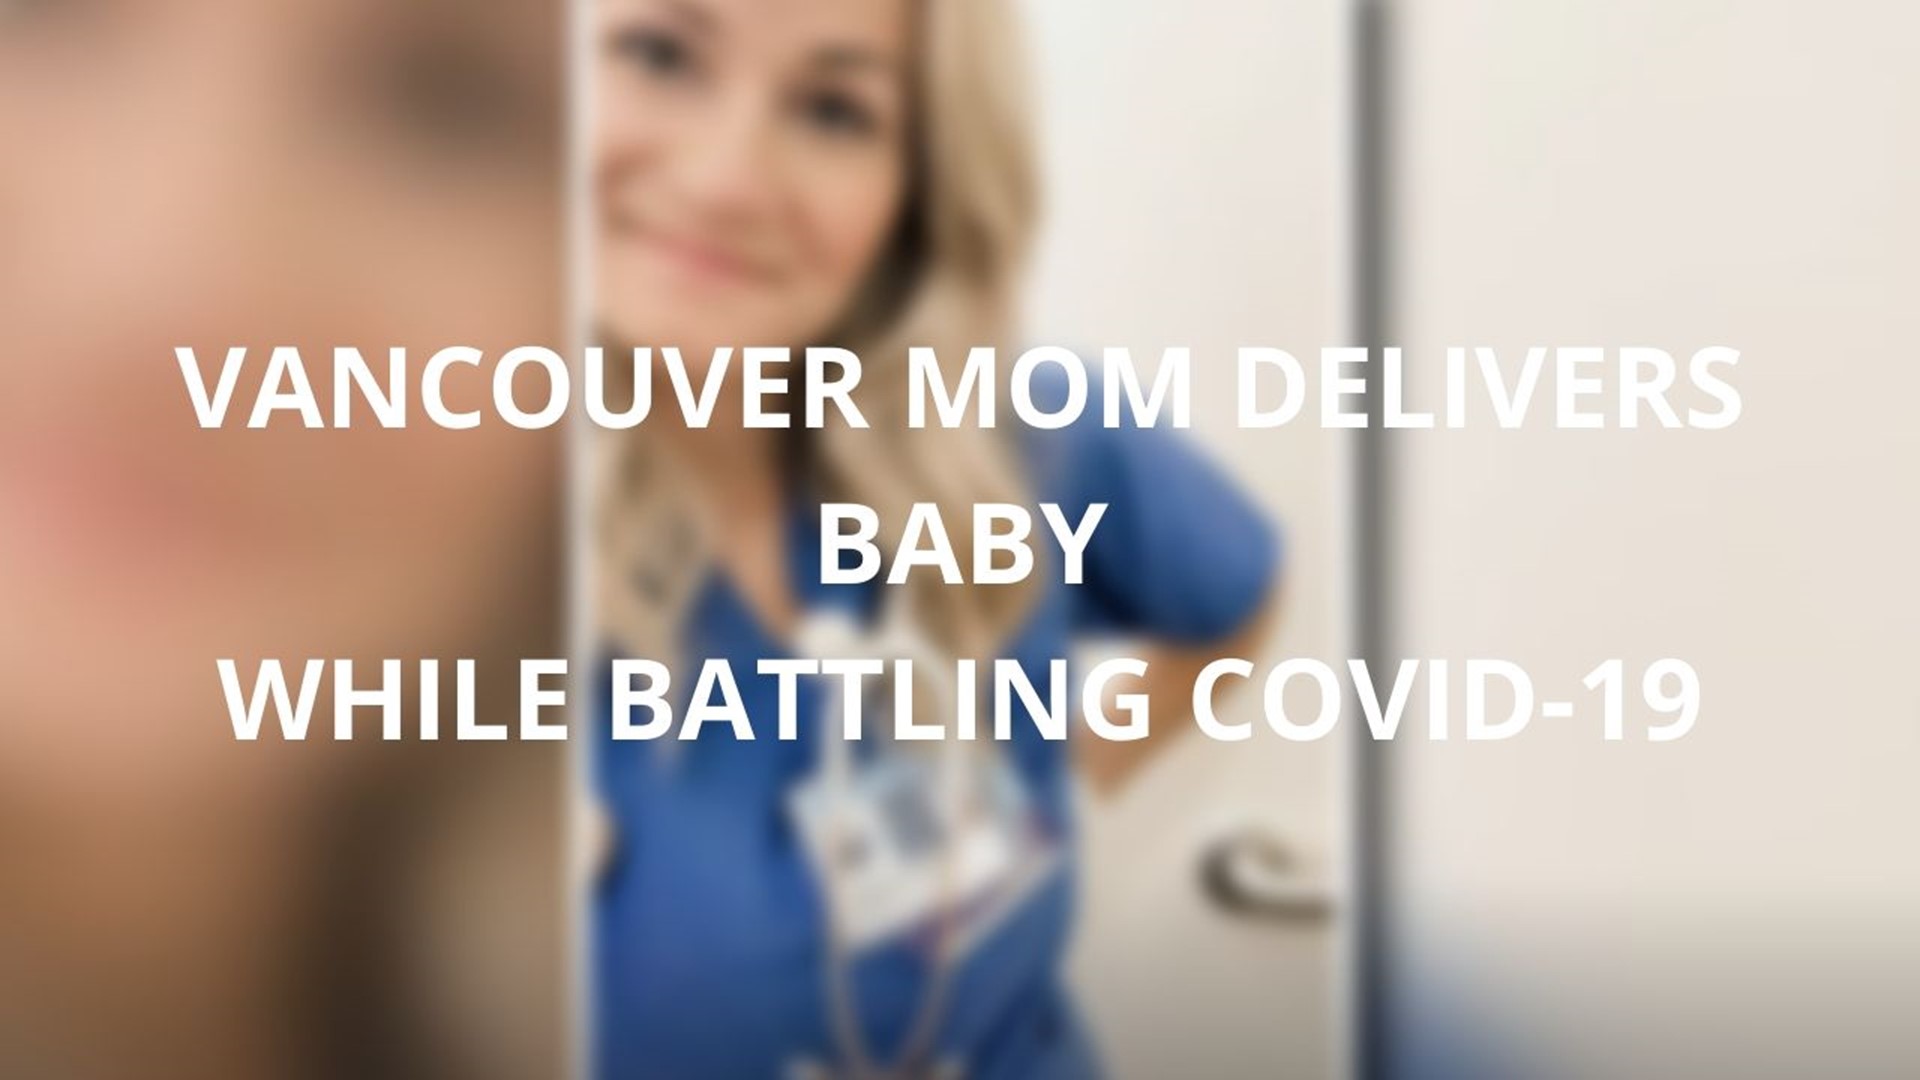 Vancouver mom delivers baby while battling COVID-19 in a coma